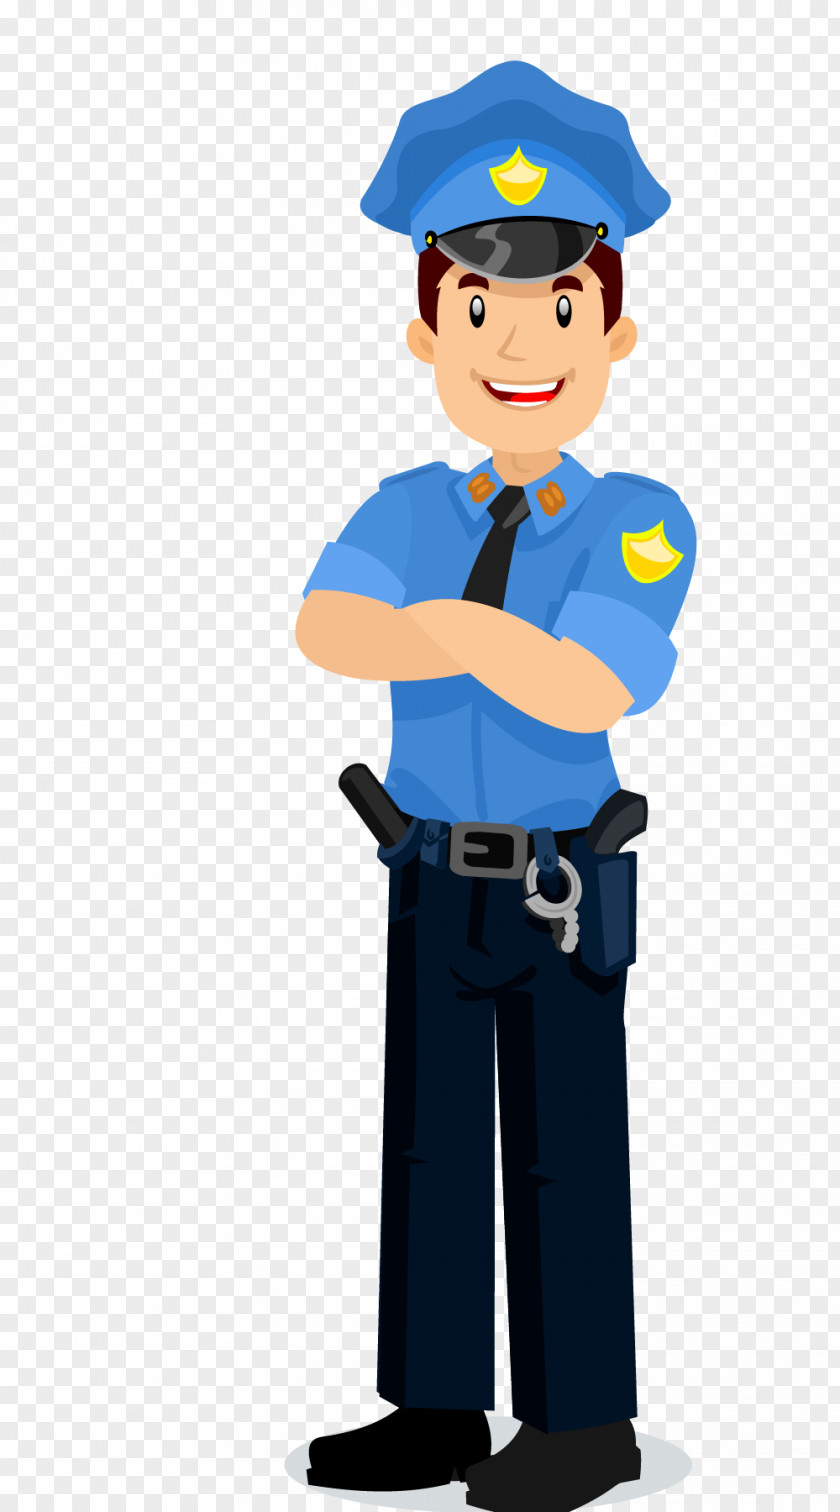 Ais Graphic Clip Art Profession Vector Graphics Police Officer Job PNG